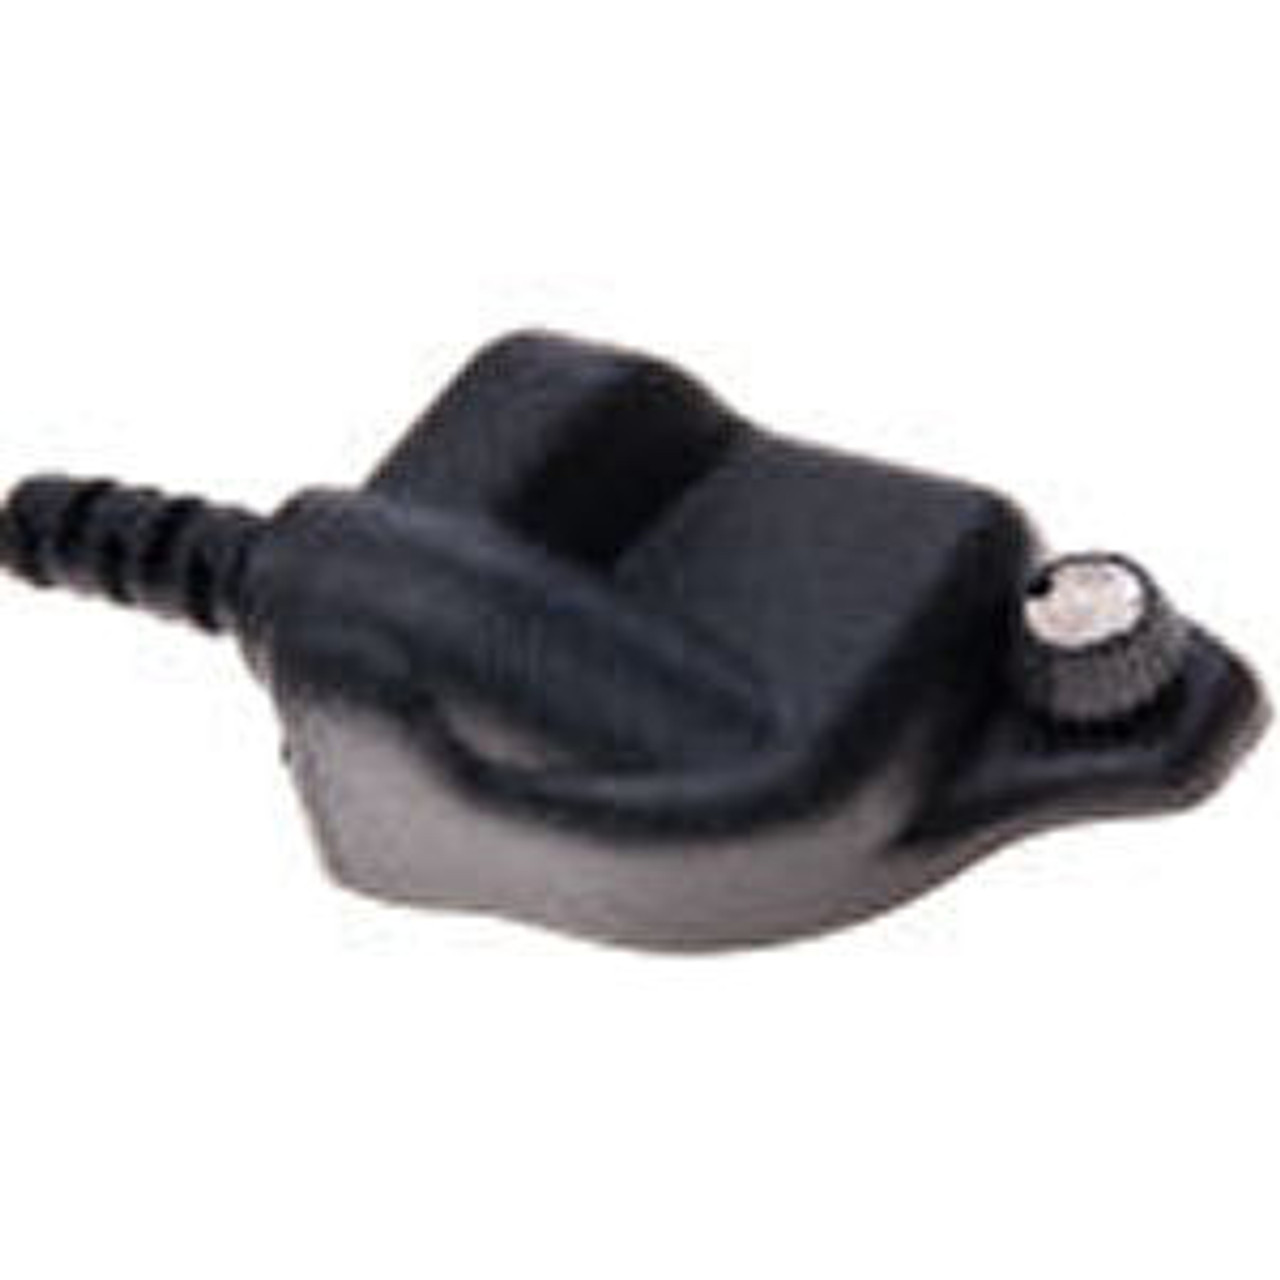 Otto ClearTrak NRX Behind The Head Double Muff Headset For Harris P5300